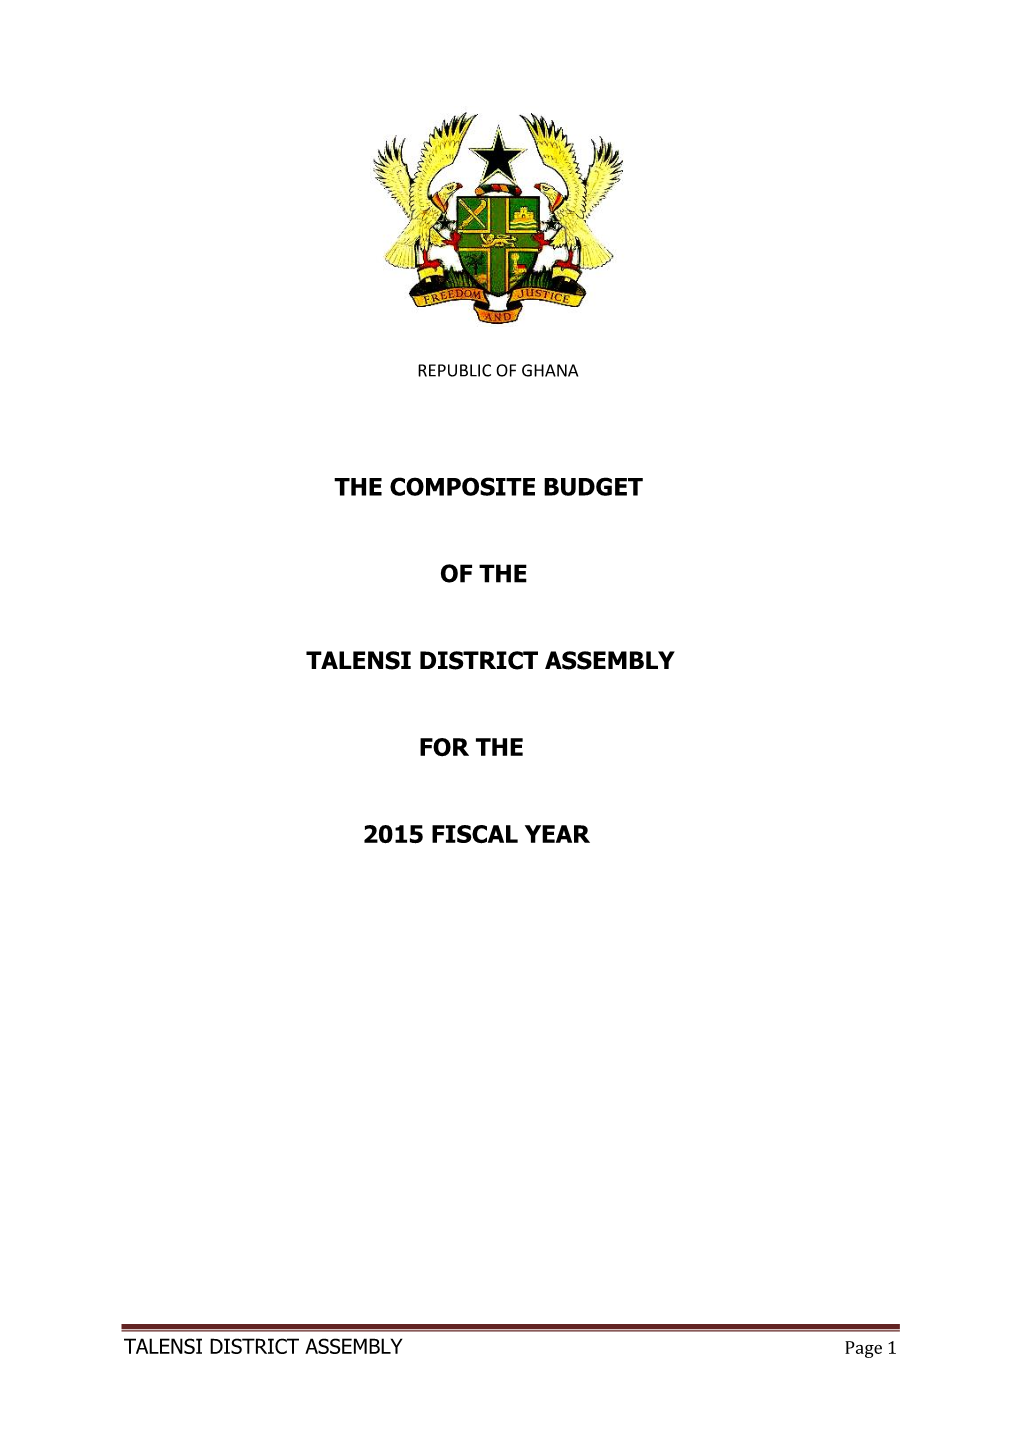 The Composite Budget of the Talensi District Assembly for the 2015 Fiscal Year